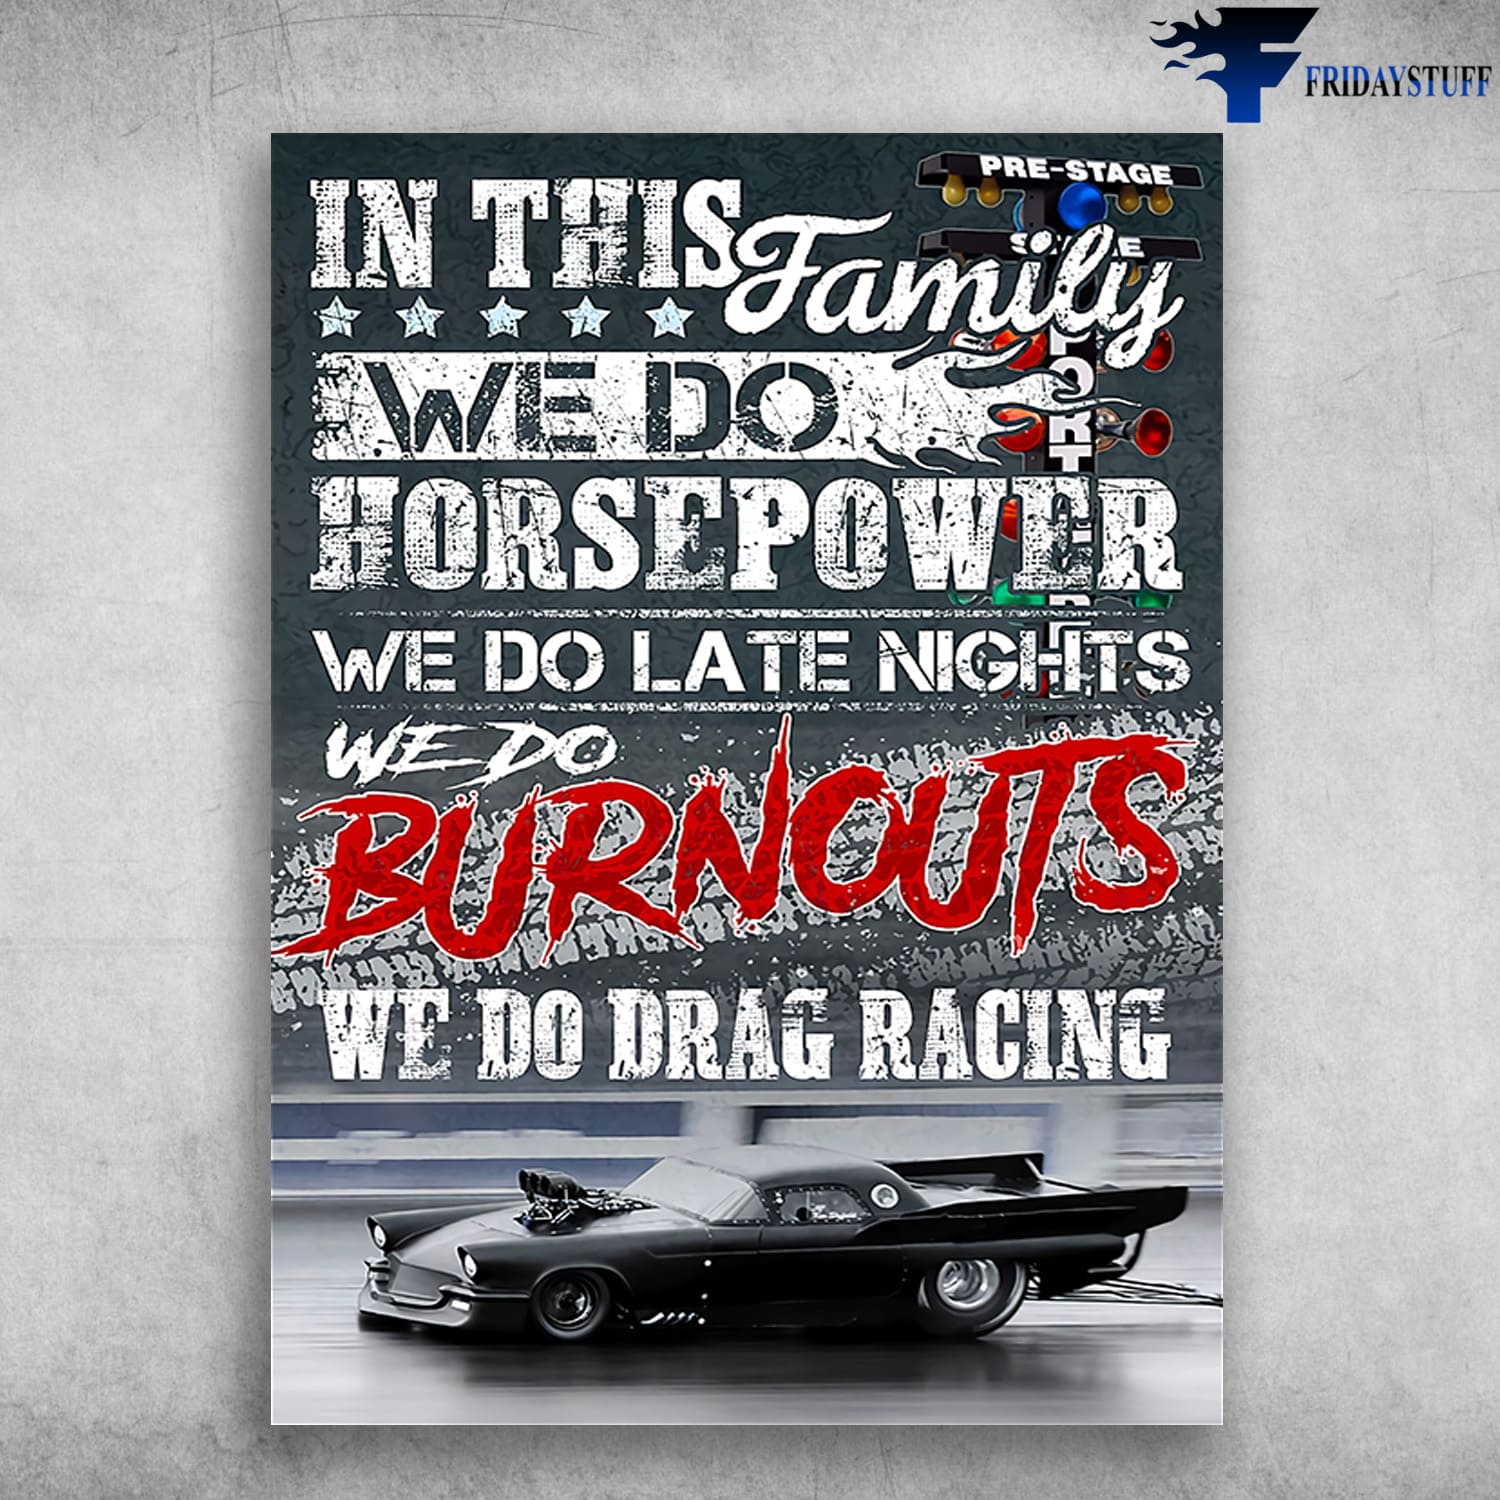 racing car quotes and sayings